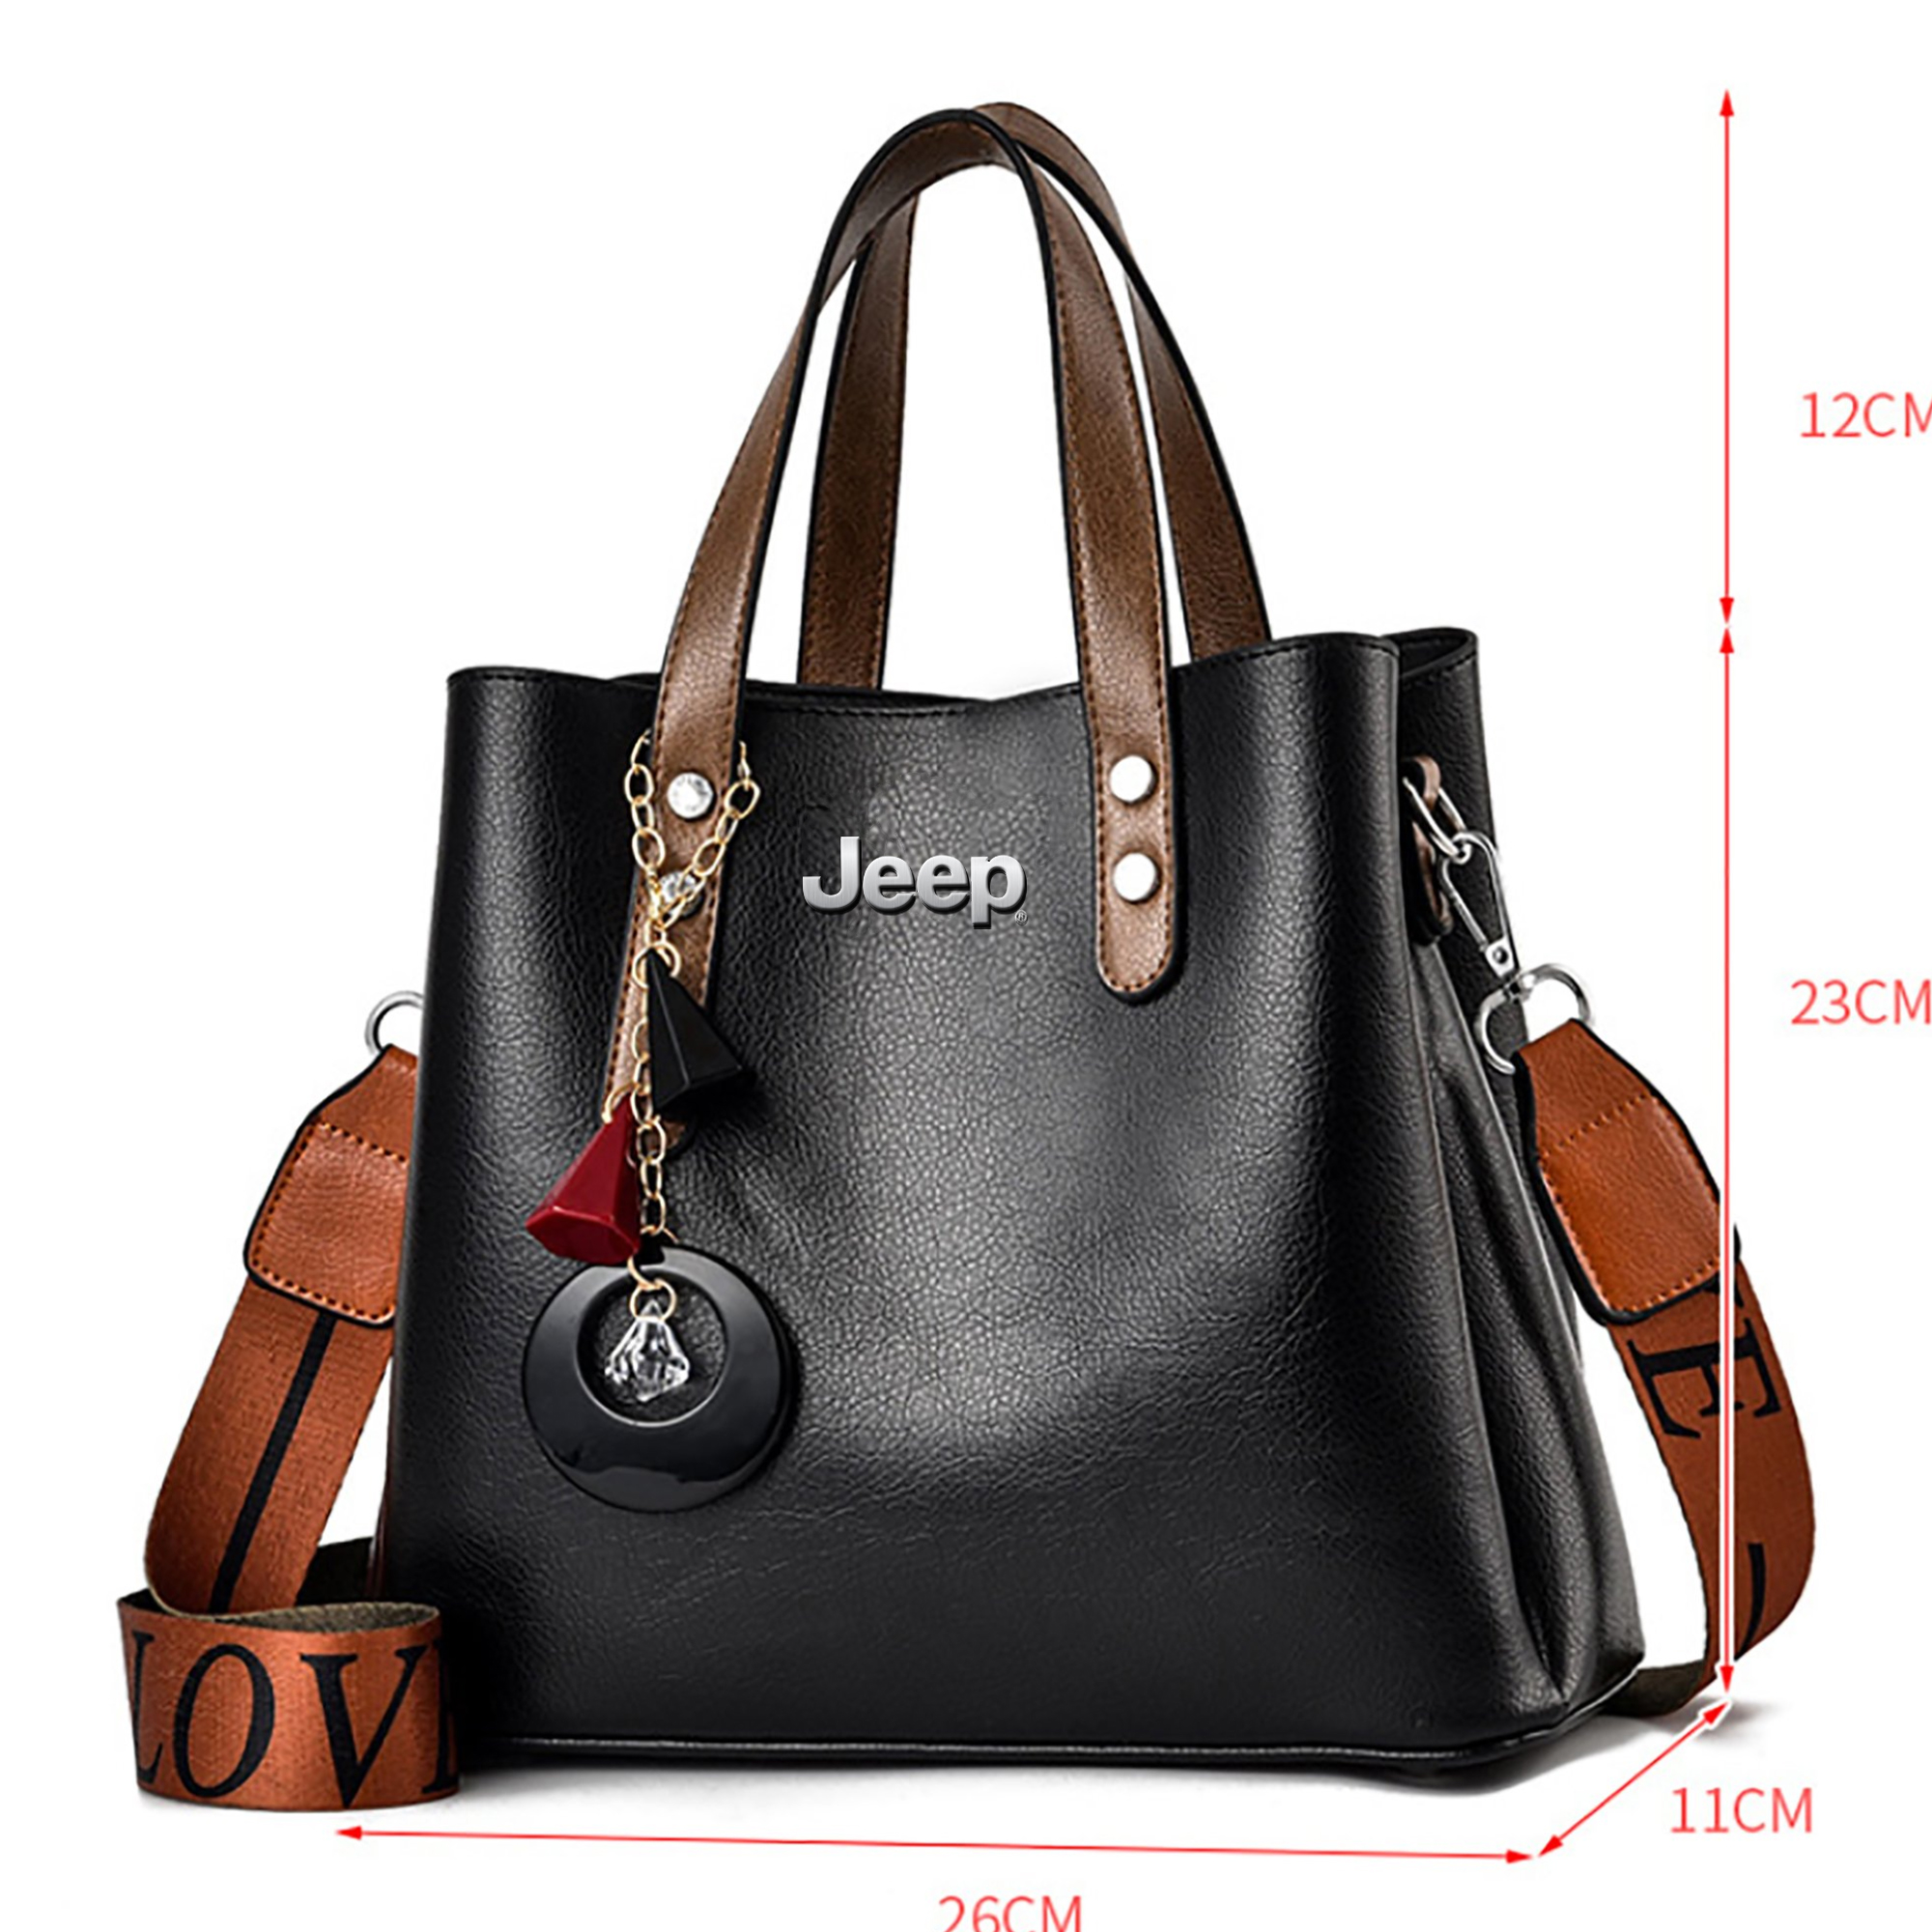 jeep bags size